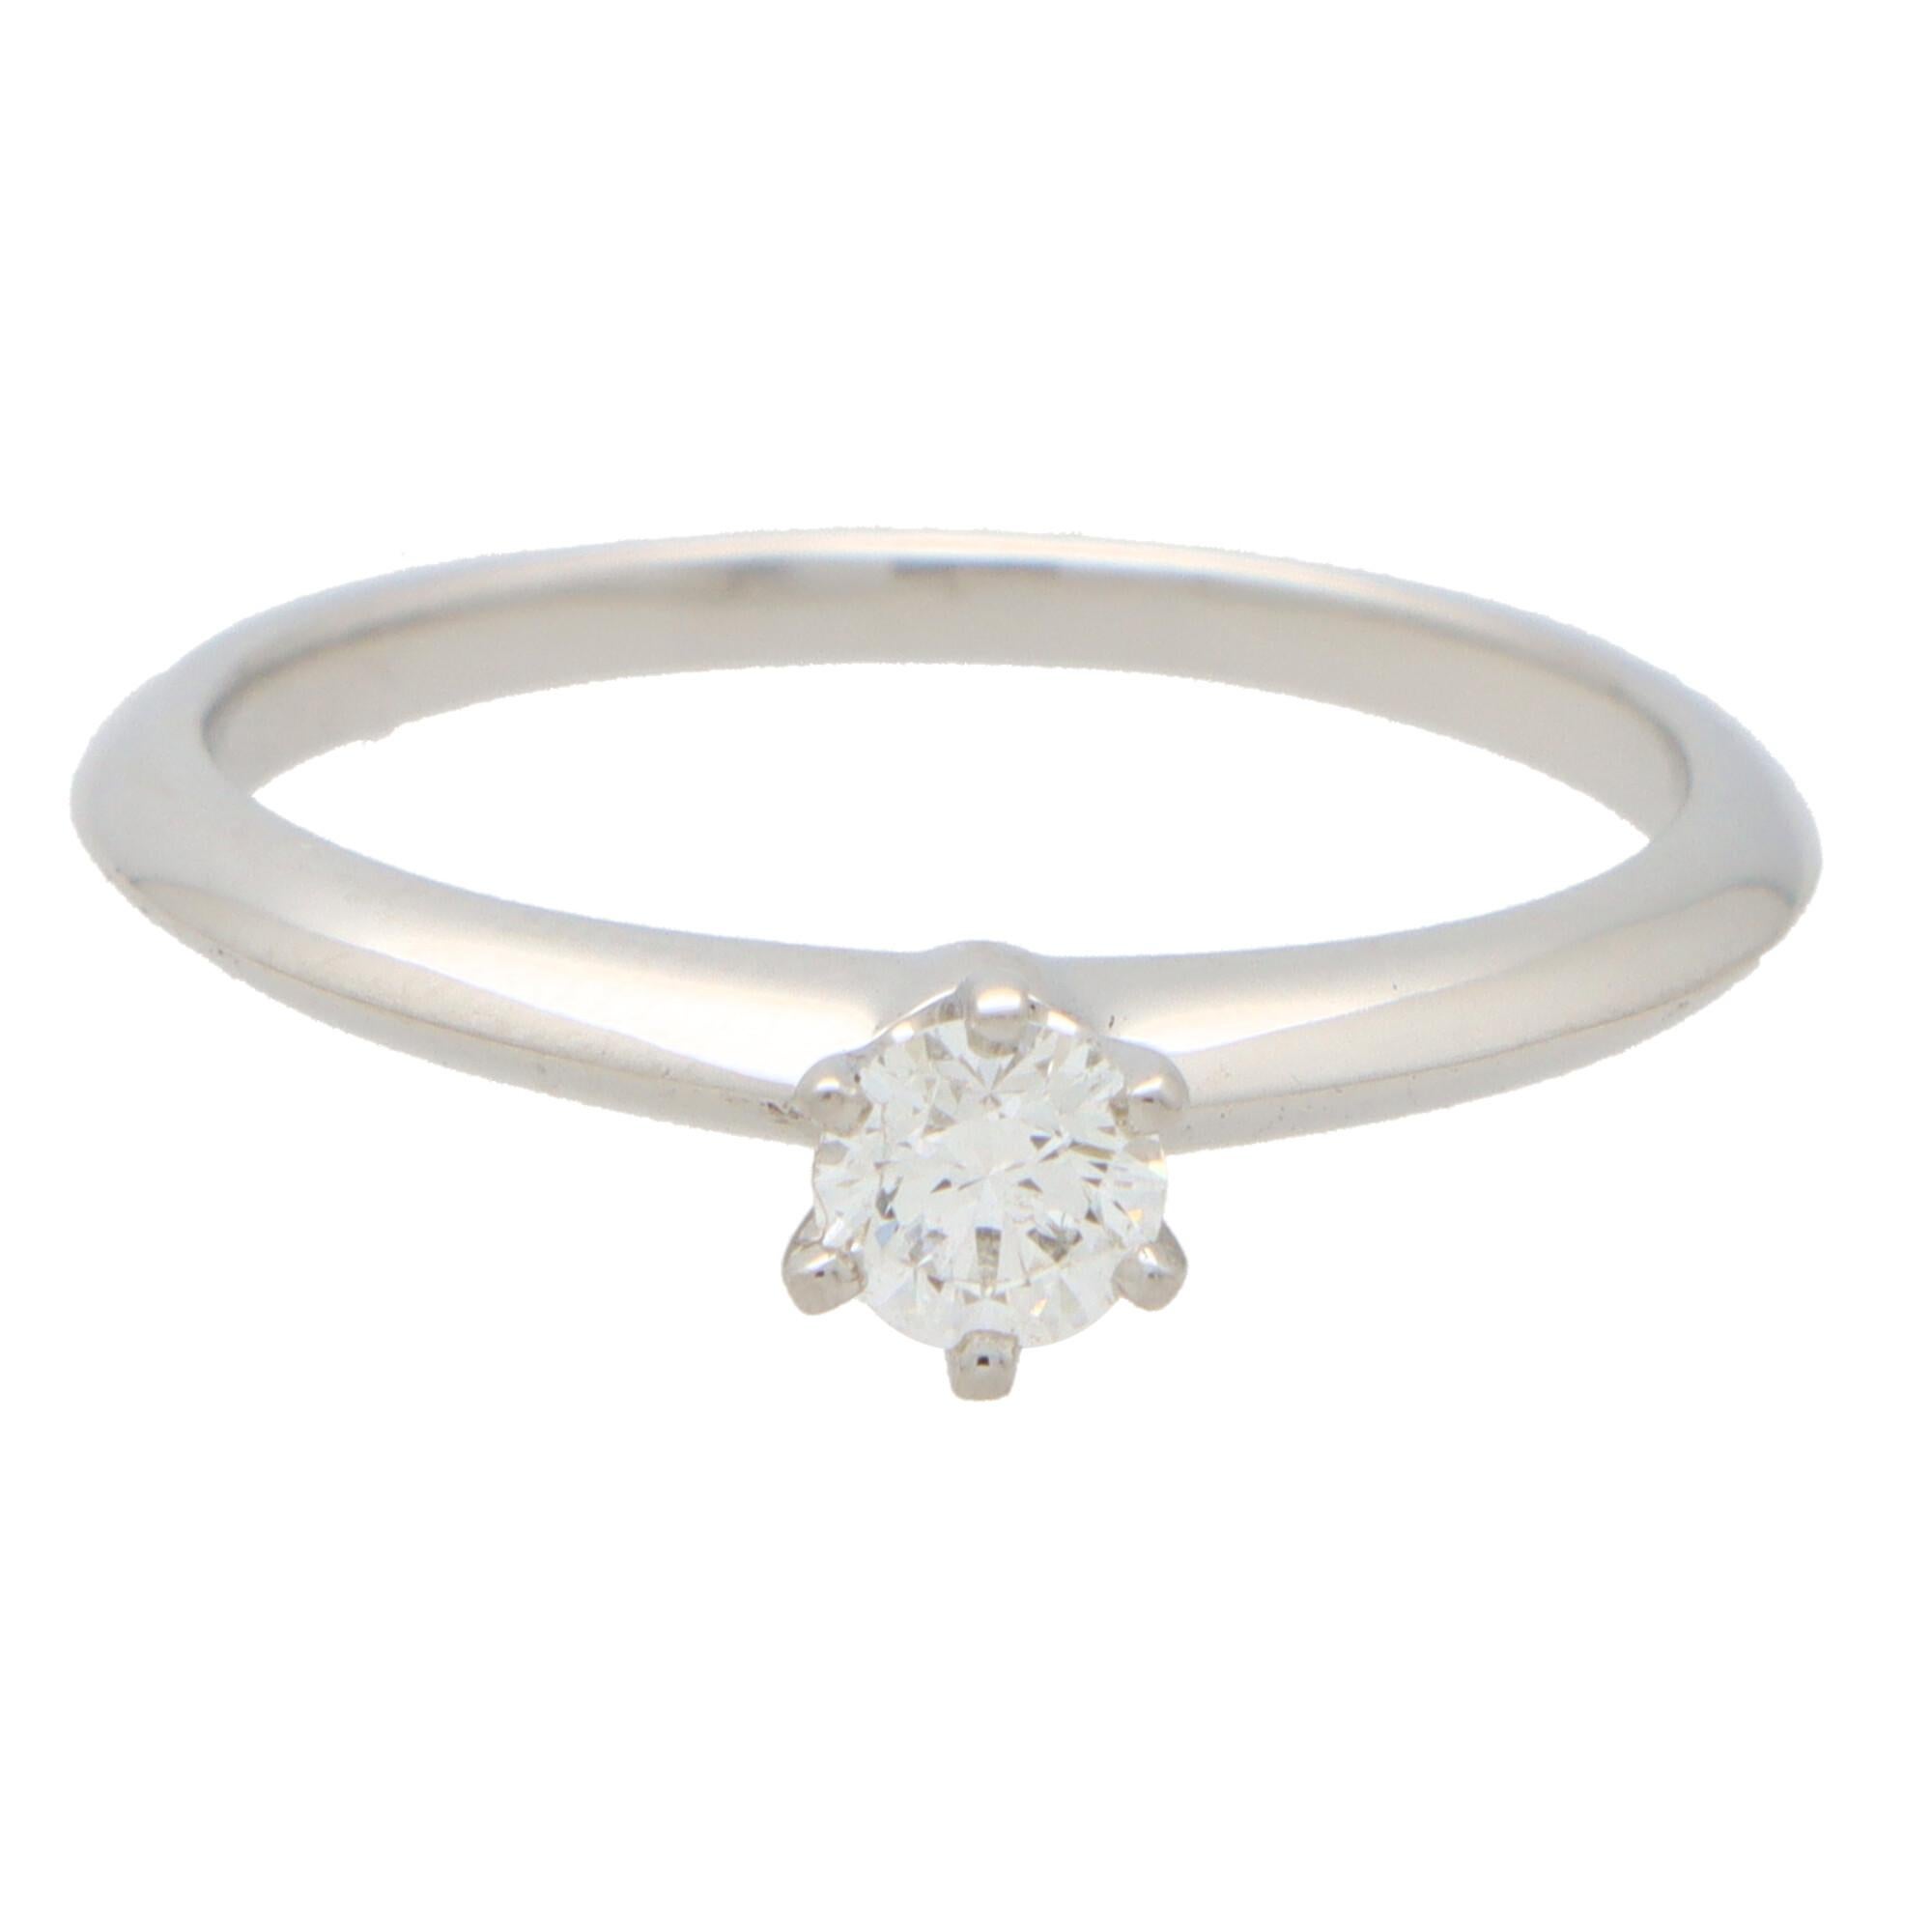  A beautiful vintage Tiffany & Co. round brilliant cut diamond single solitaire ring, set in platinum.

The piece is solely set with a beautiful 0.25 carat round brilliant cut diamond which is six-claw set in a knife edge band mounting.

The beauty